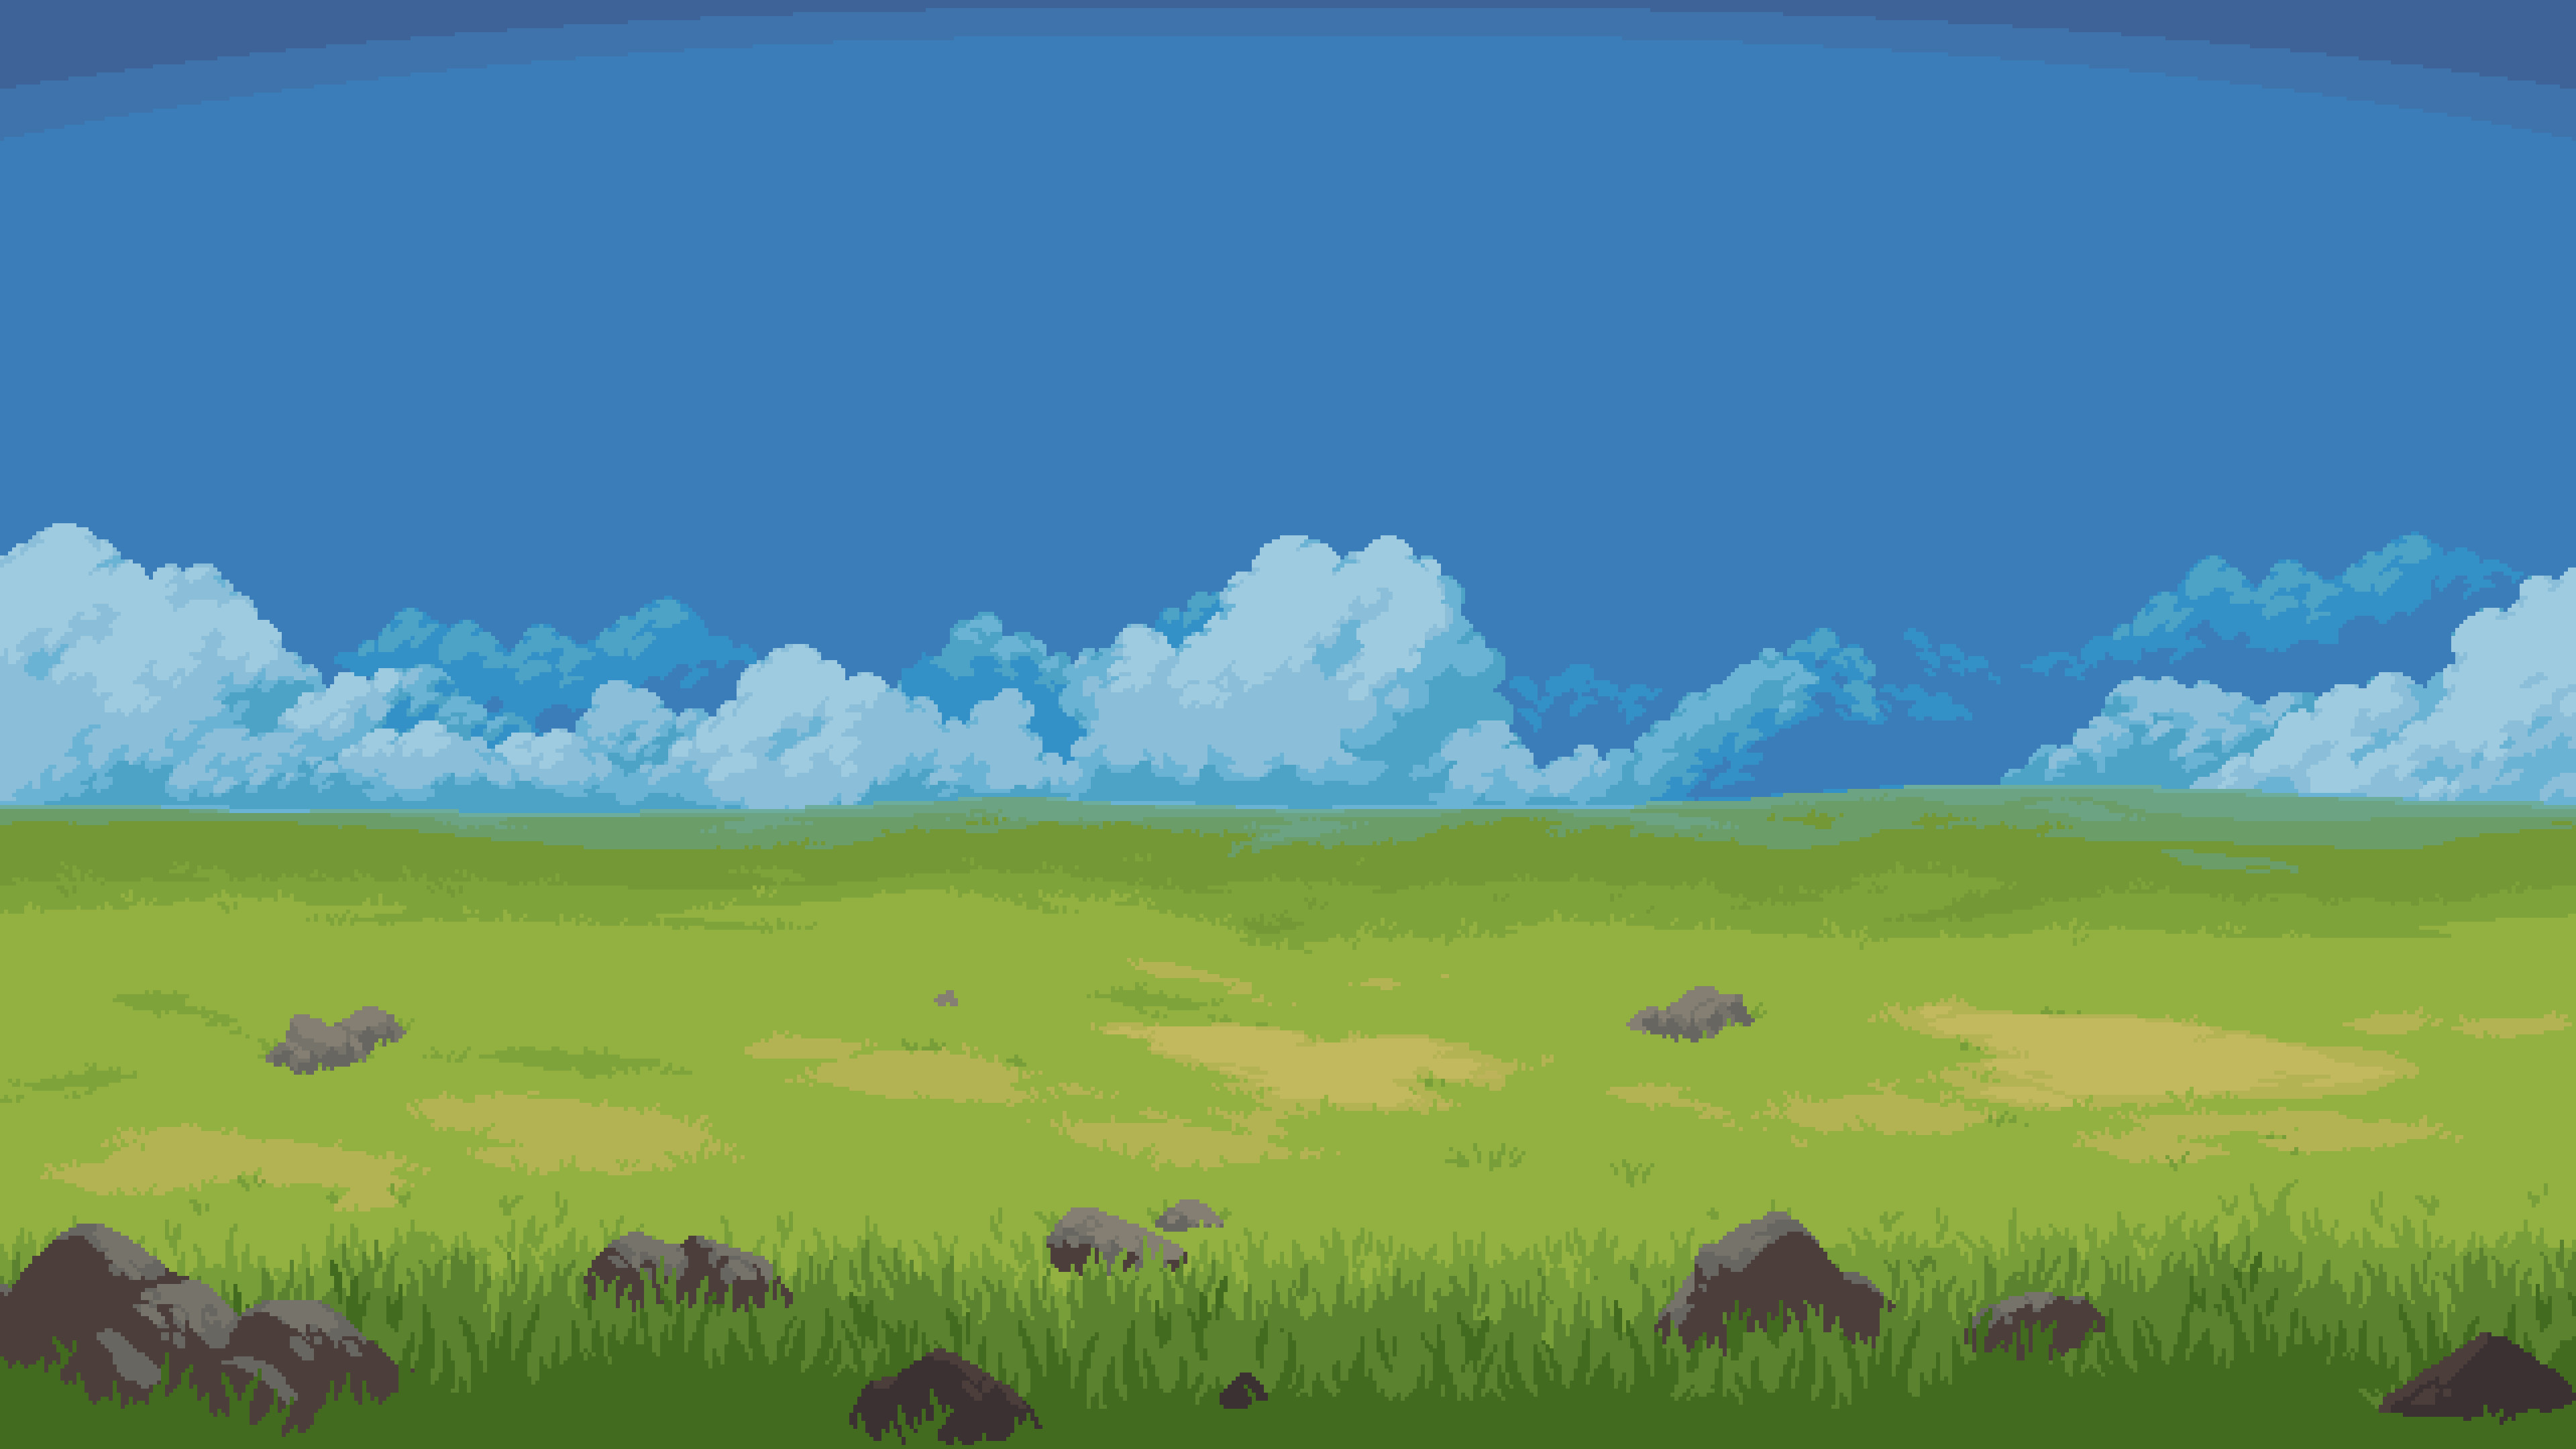 3840x2160 I took the background from the game's website and blew it up to 4k  resolution. Here it is if anyone wants a neat pixel art wallpaper!